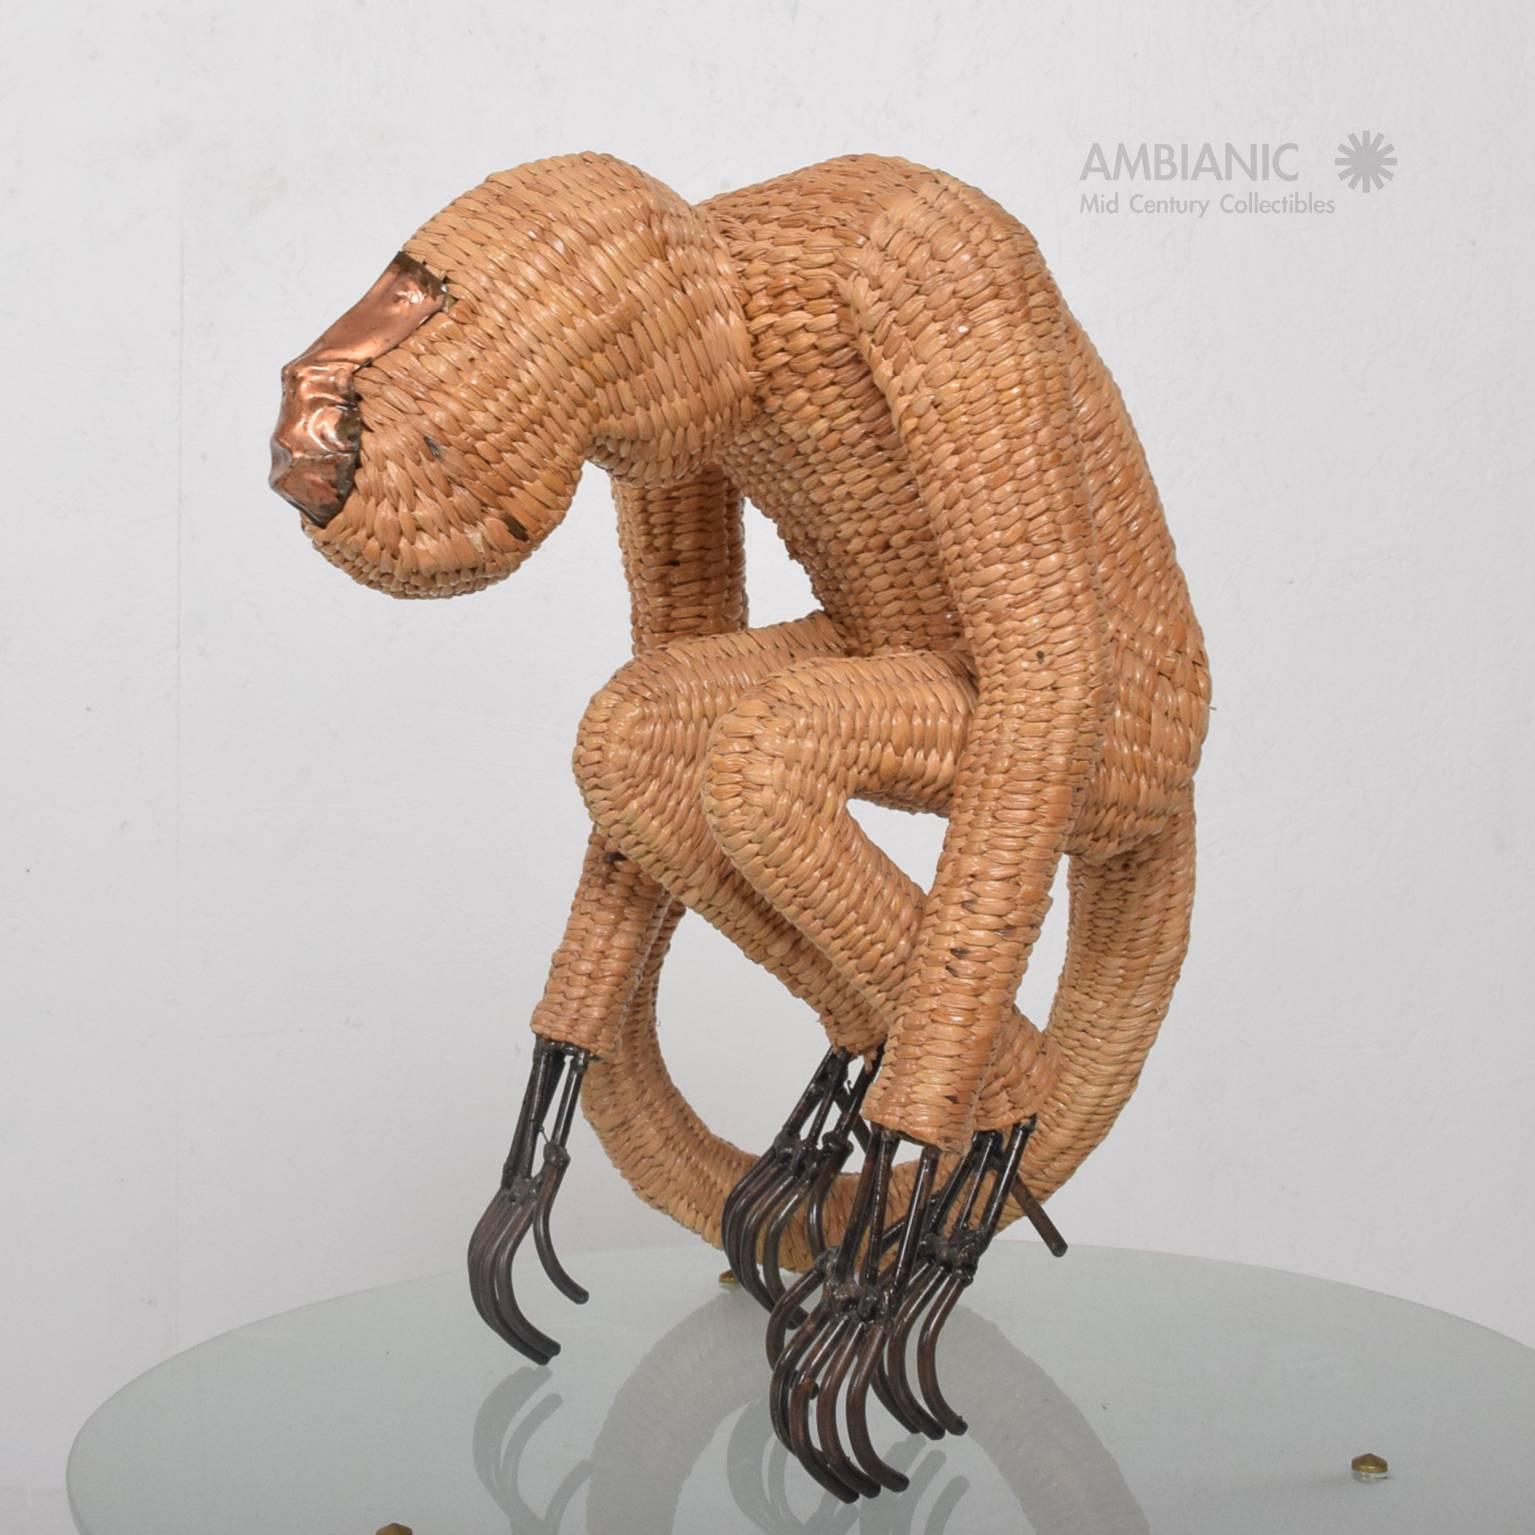 For your consideration a wicker monkey sculpture by Mario Lopez Torres

Beautiful original condition. 

Measure: 18" H x 17" D x 15" W

